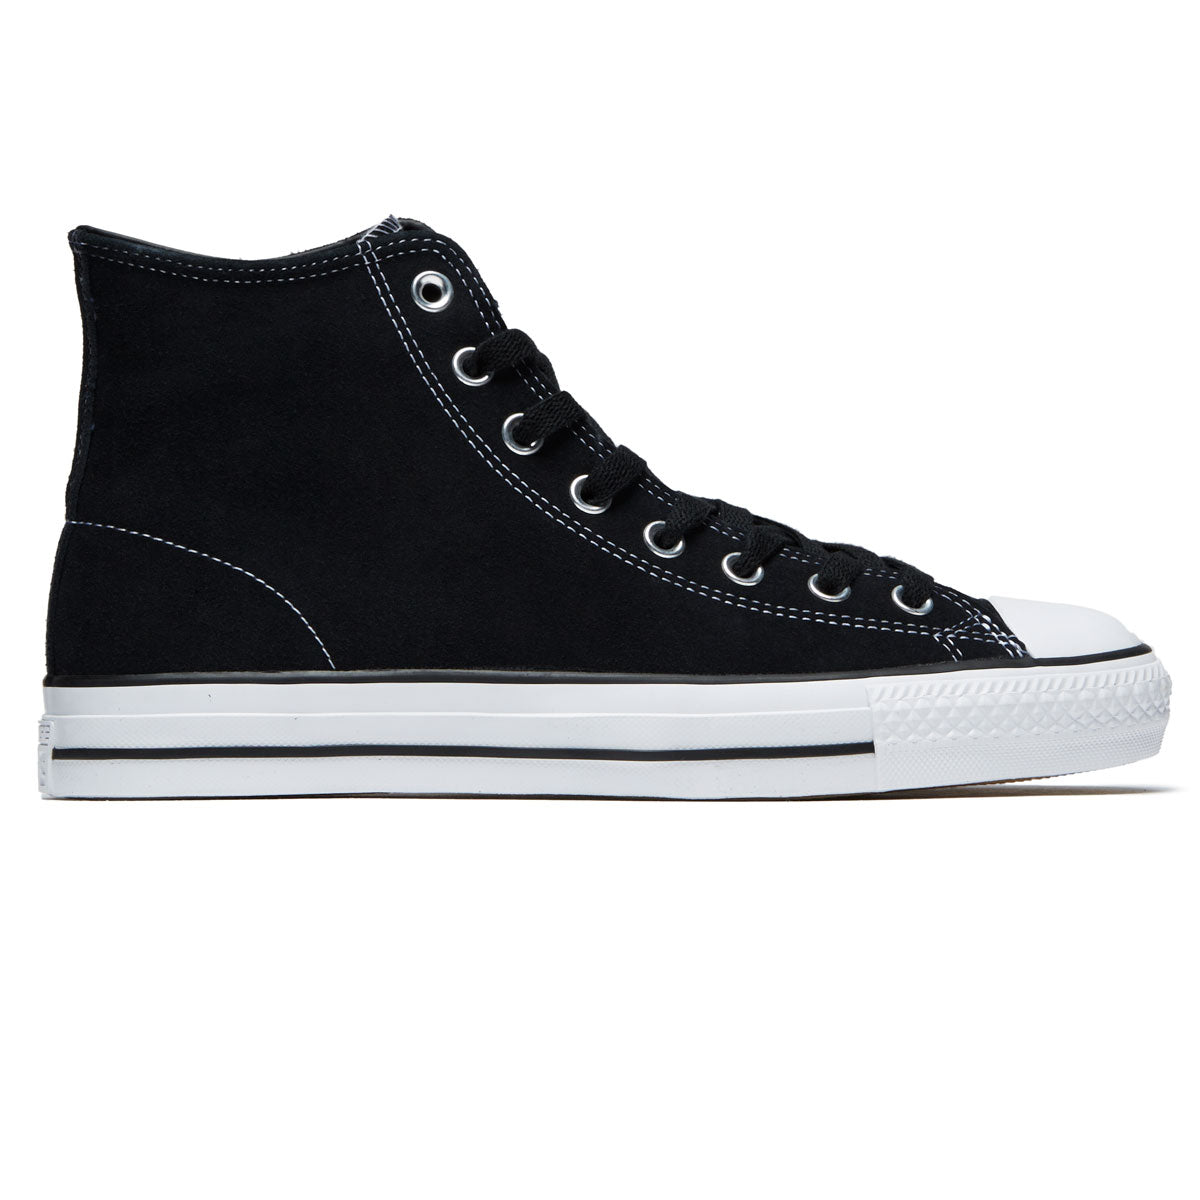 Converse Chuck Taylor All Star Pro Suede Hi Shoes - Black/Black/White image 1